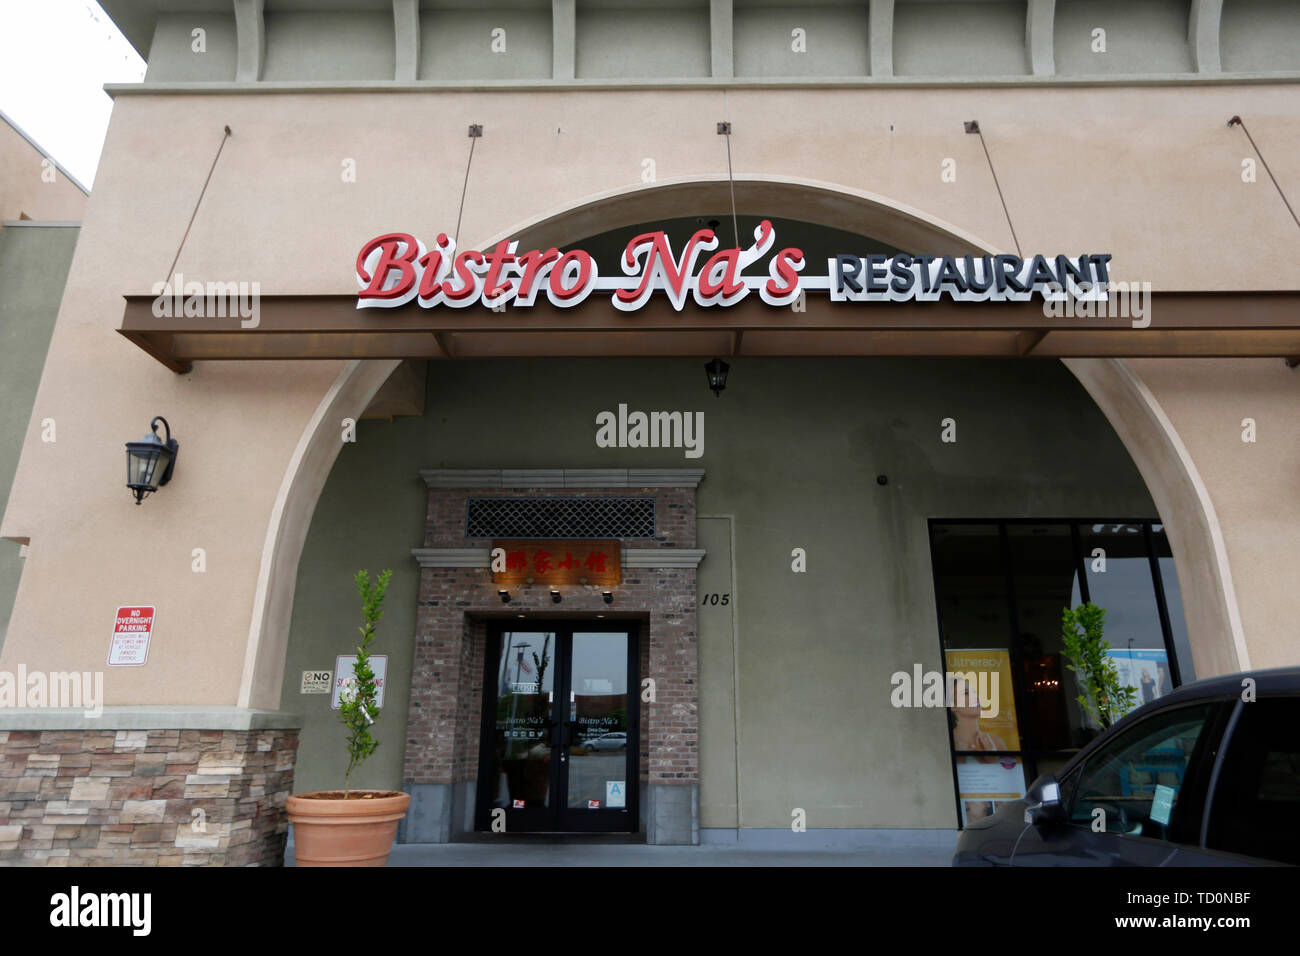 Los Angeles, USA. 7th June, 2019. Photo taken on June 7, 2019 shows the exterior view of Bistro Na's in Temple City, Los Angeles, the United States. Bistro Na's in Los Angeles made headlines this week with the announcement that it had been awarded a coveted Michelin Star by the famed Michelin Restaurant Guide. This special ranking broke Michelin's 10-year absence from Los Angeles, and made Bistro Na's the only Chinese restaurant in Southern California to be so honored. Credit: Li Ying/Xinhua/Alamy Live News Stock Photo